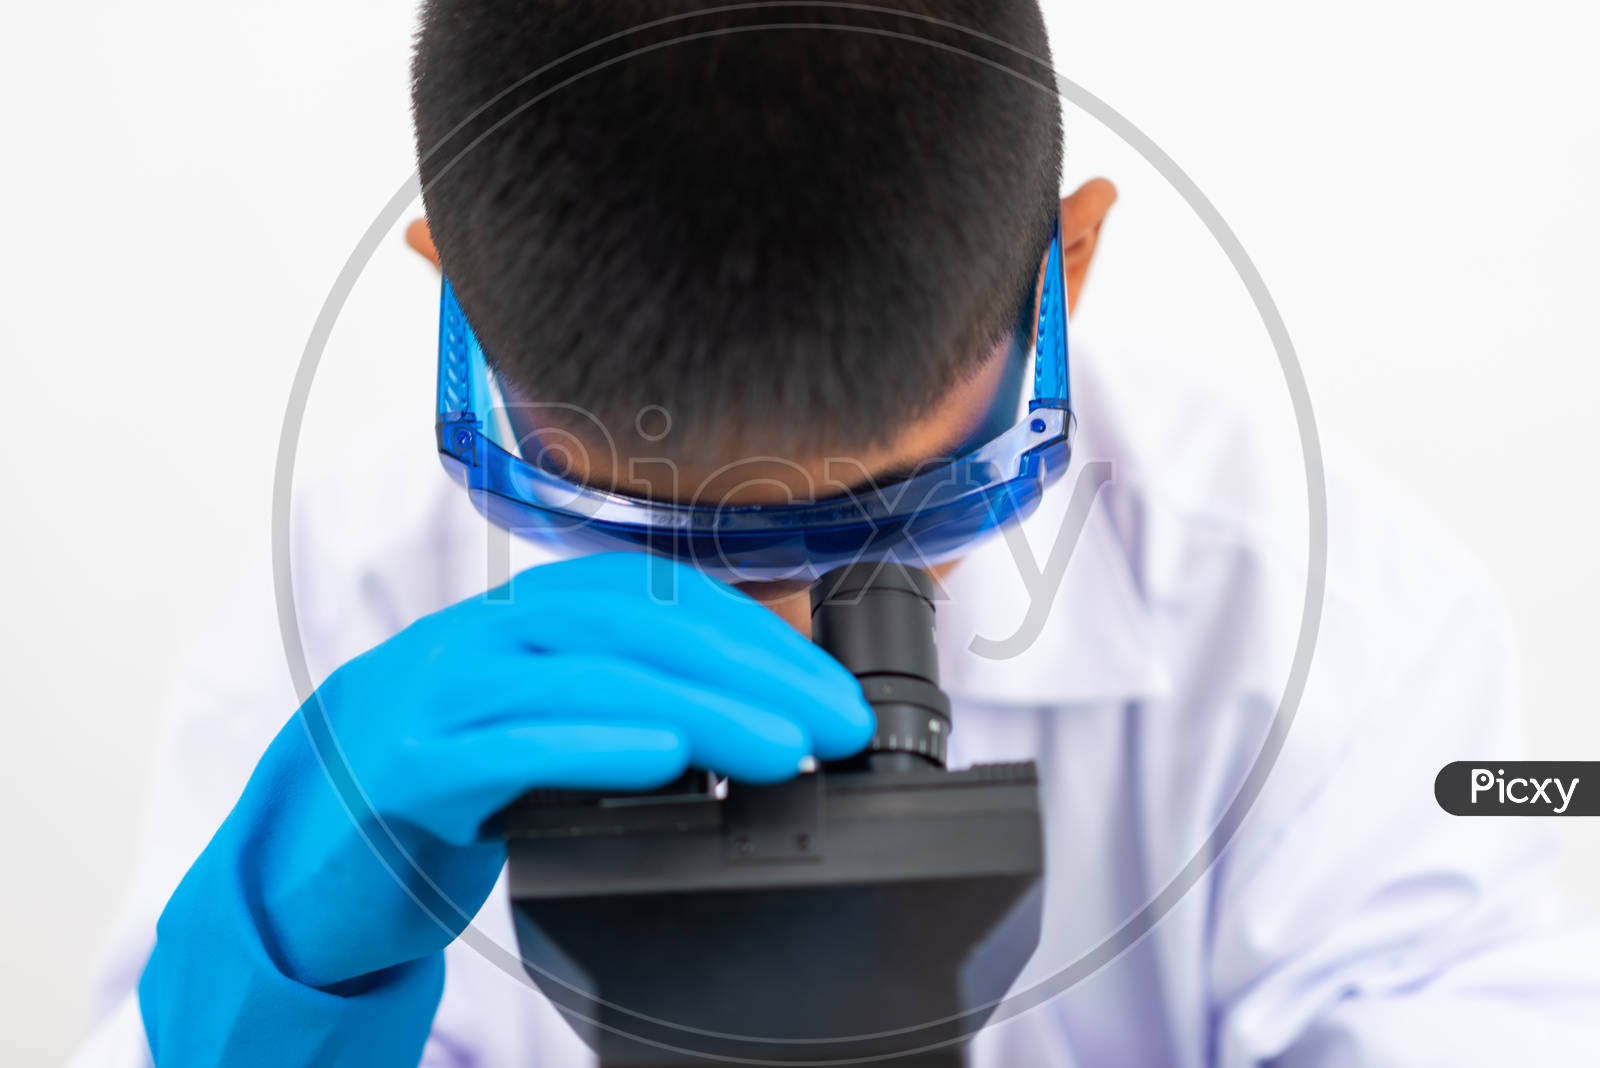 Asian Child Scientist Looking on Microscope in Laboratory